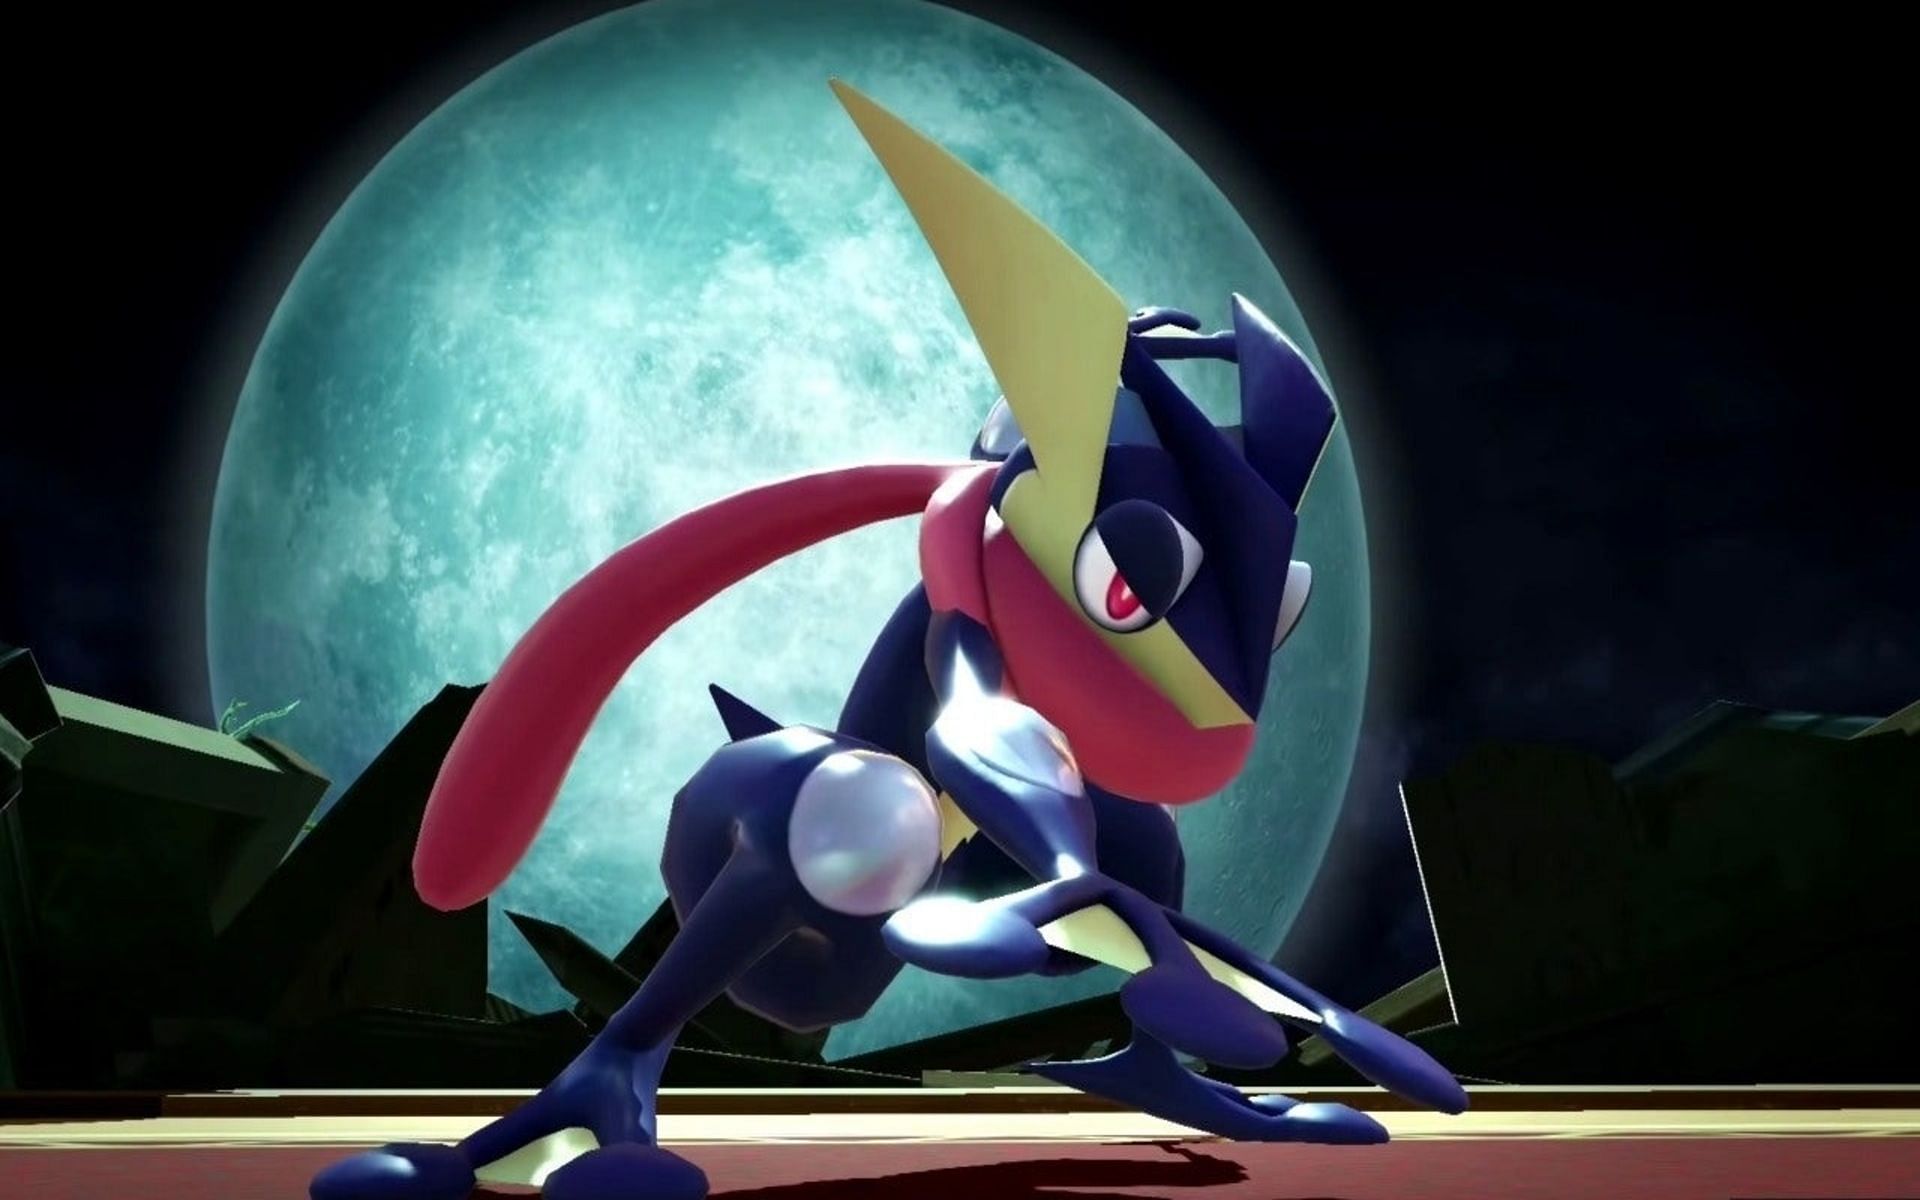 Greninja was missing from Generation VIII despite appearances in other games (Image via Hal Laboratories)